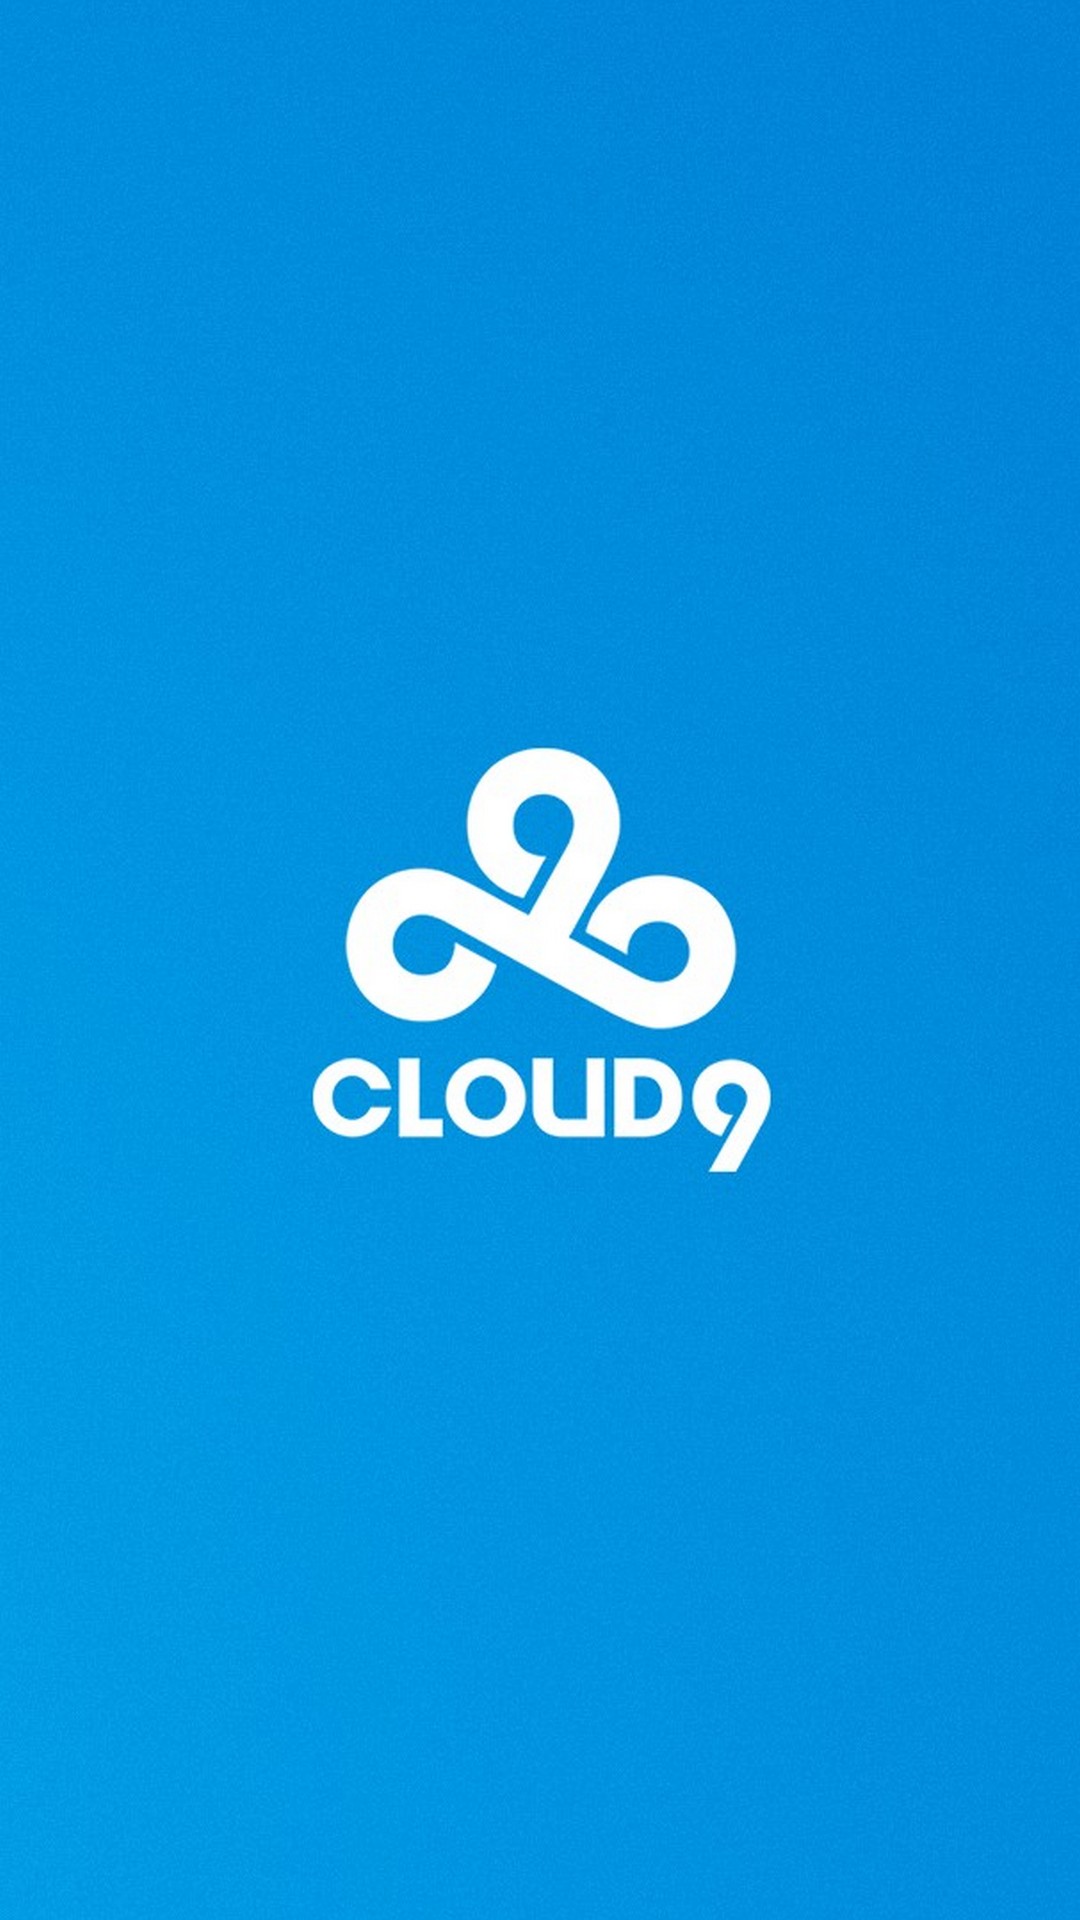 Cloud 9 iPhone Wallpaper with HD Resolution 1080X1920